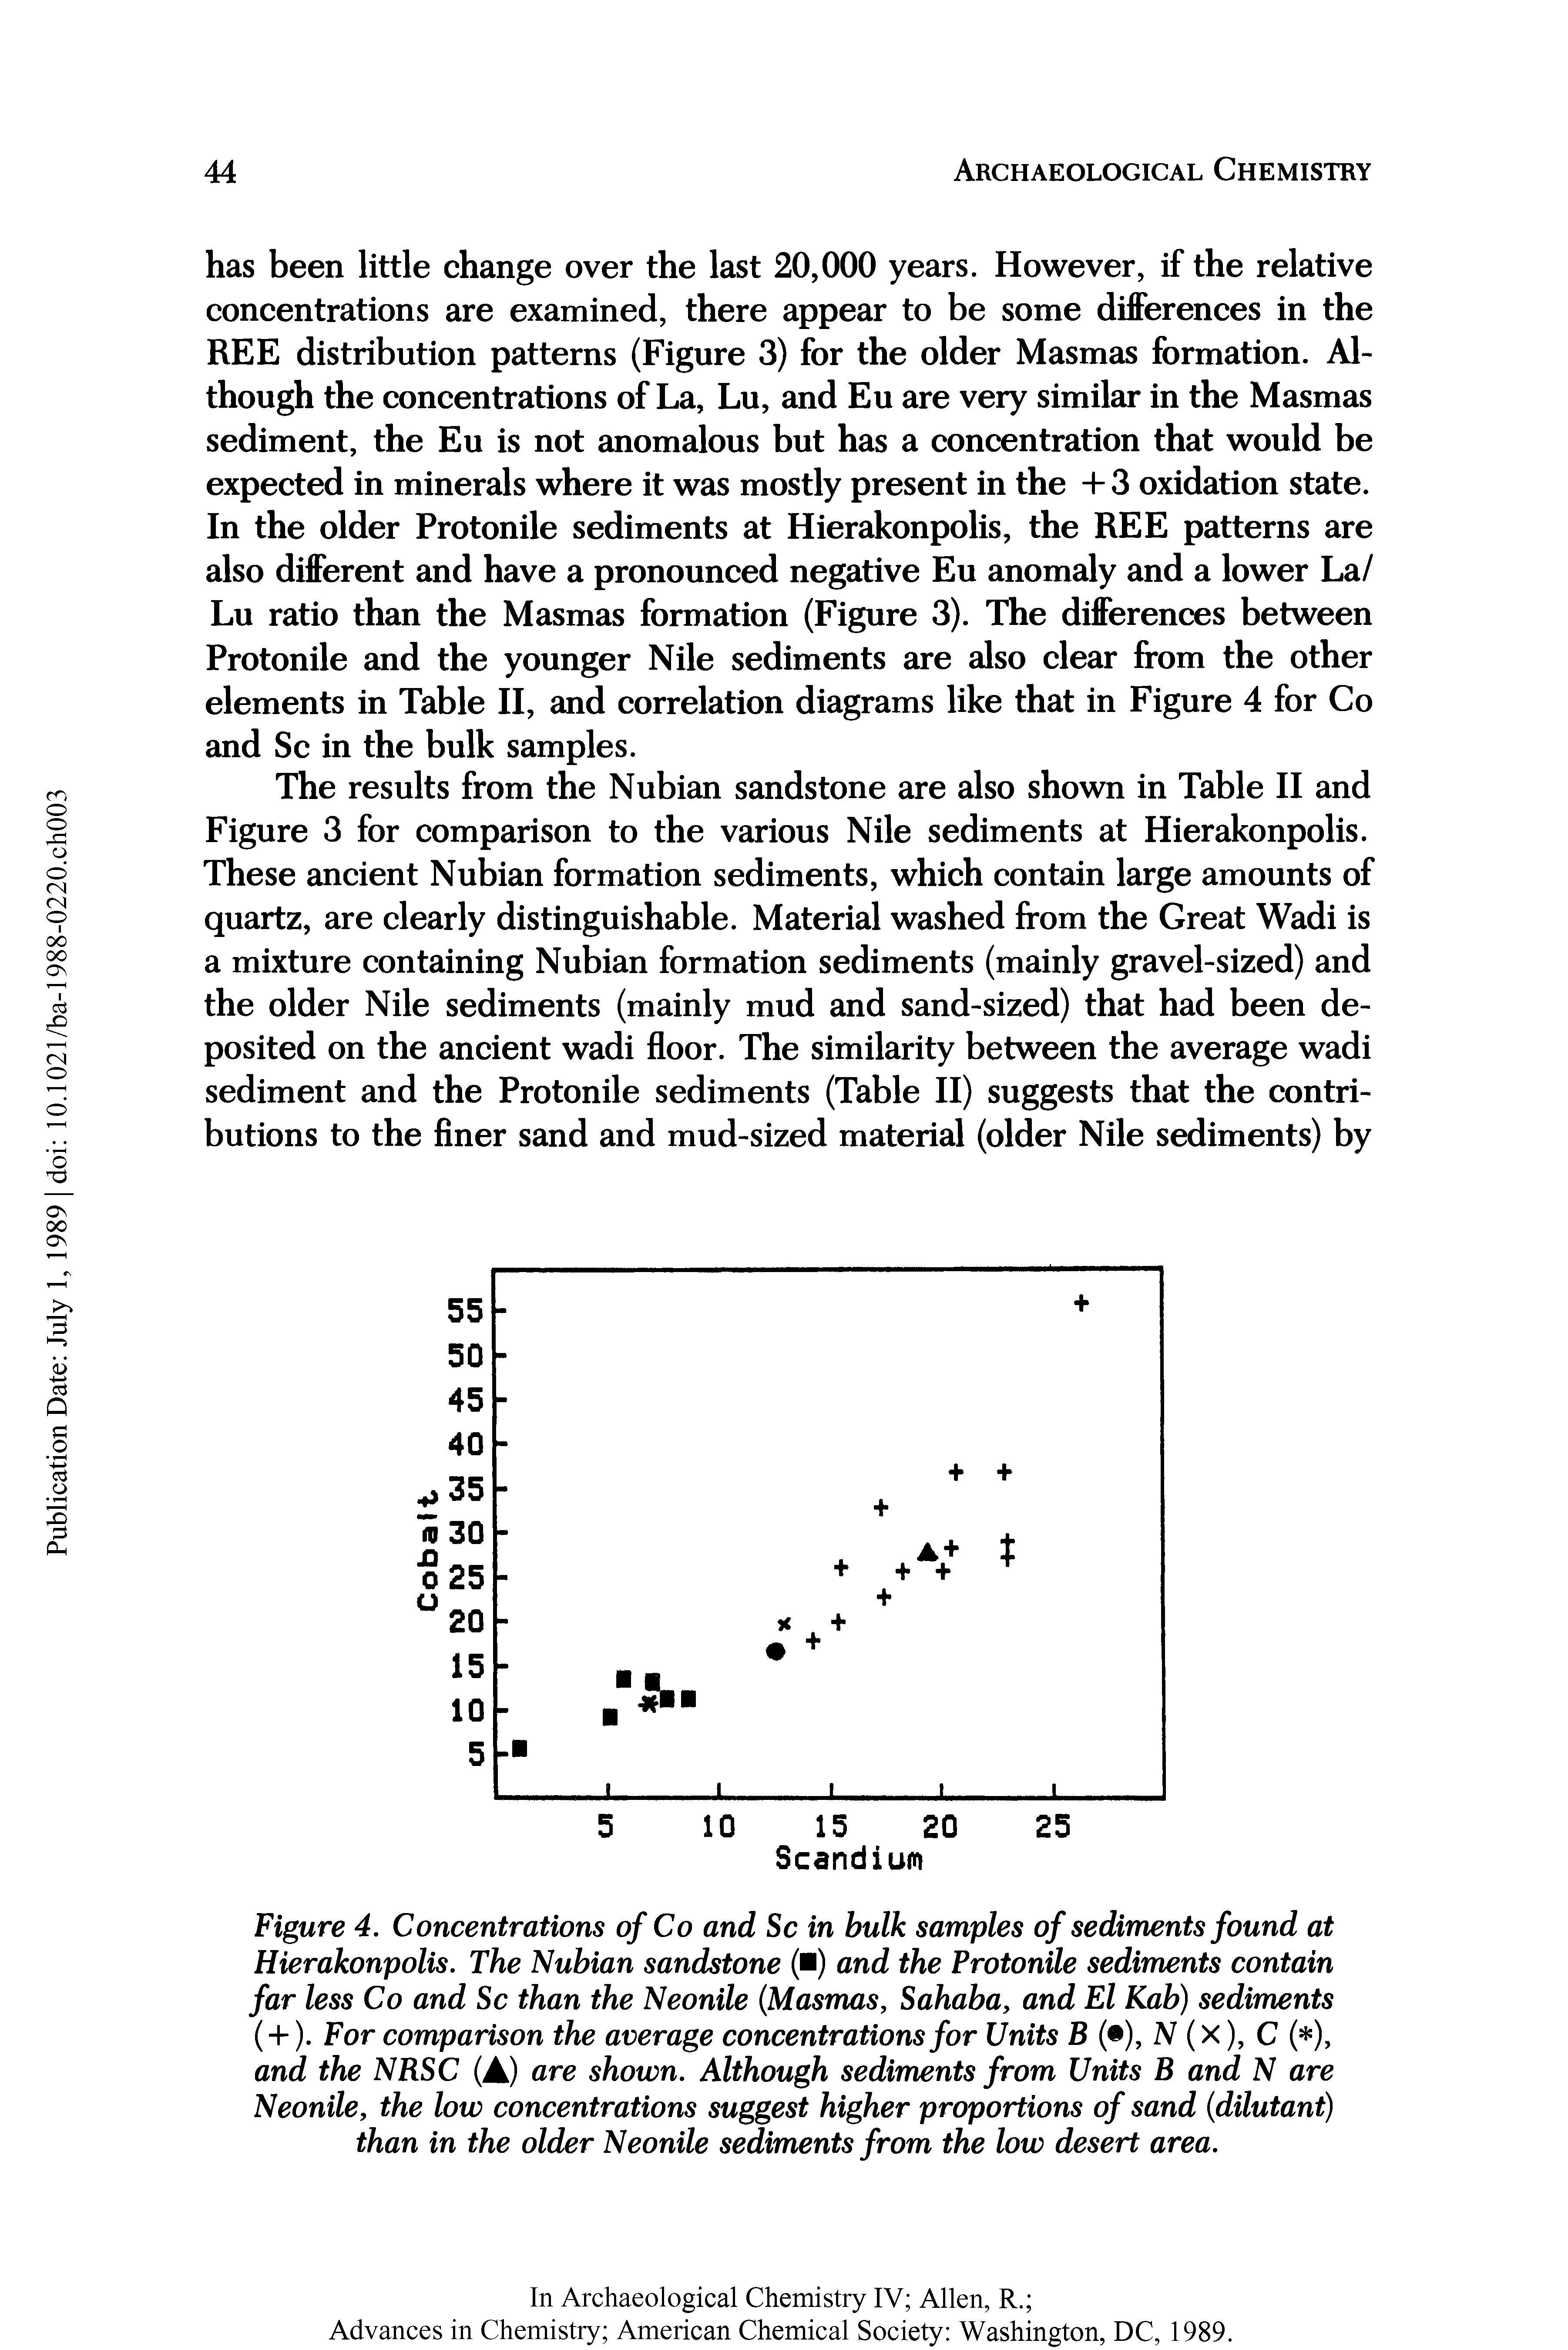 Figure 4. Concentrations of Co and Sc in bulk samples of sediments found at Hierakonpolis. The Nubian sandstone ( ) and the Protonile sediments contain far less Co and Sc than the Neonile (Masmas, Sahaba, and El Kab) sediments ( + ). For comparison the average concentrations for Units B ( ), N (x), C ( ), and the NRSC (A) are shown. Although sediments from Units B and N are Neonile, the low concentrations suggest higher proportions of sand (dilutant) than in the older Neonile sediments from the low desert area.